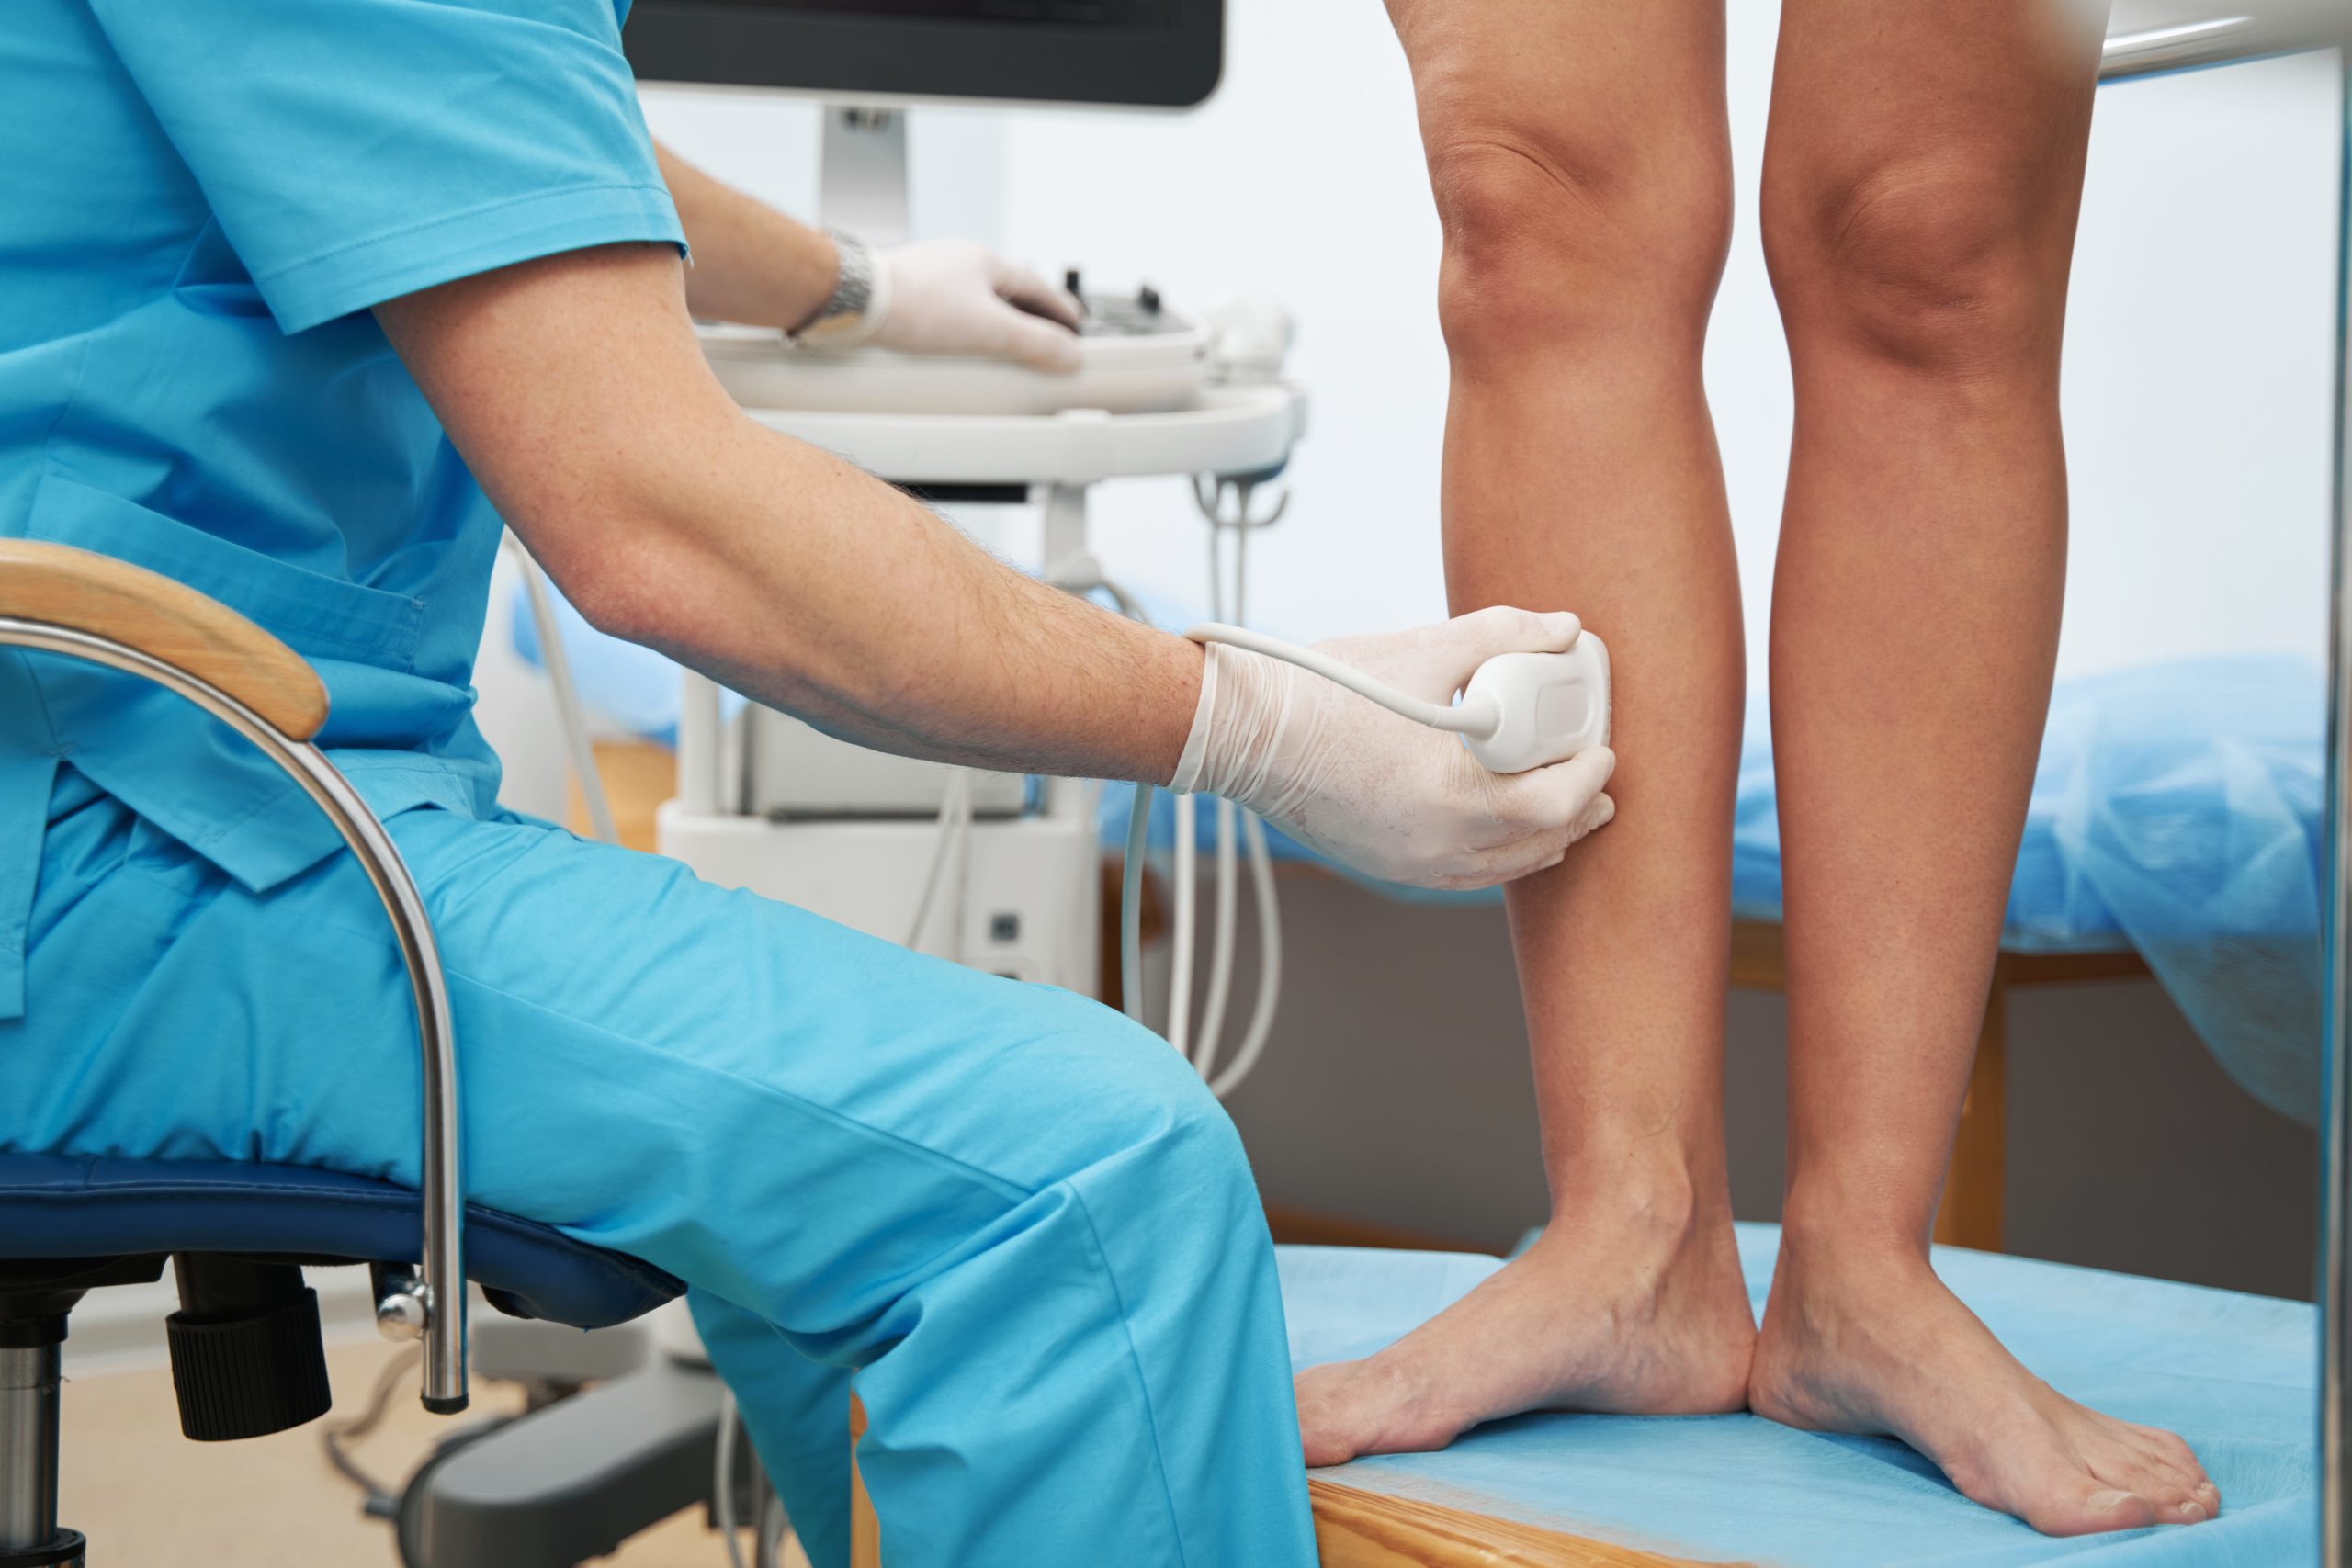 How Many Sessions Of Vein Therapy Are Required For Optimal Results